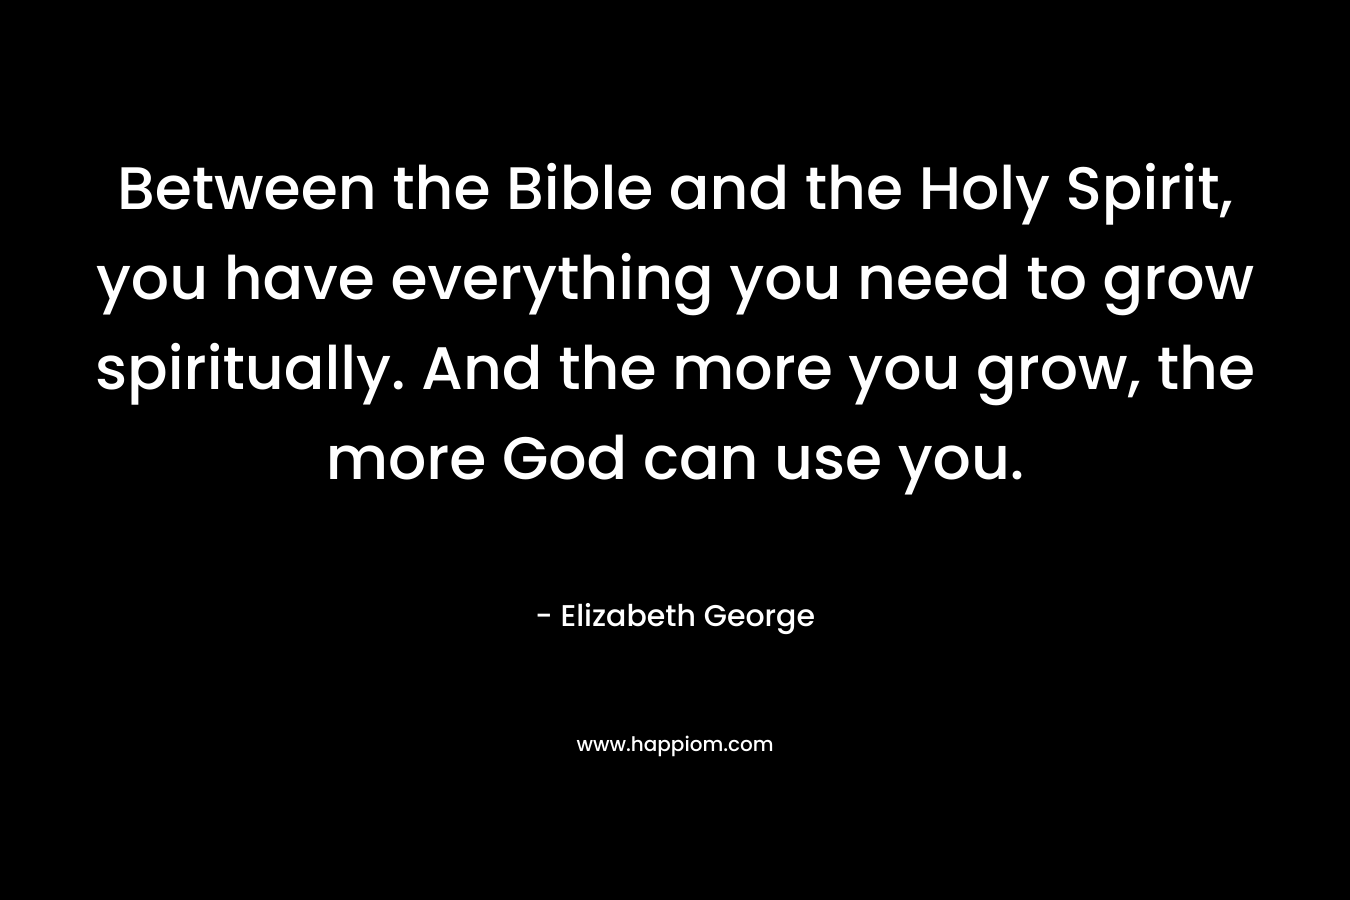 Between the Bible and the Holy Spirit, you have everything you need to grow spiritually. And the more you grow, the more God can use you.